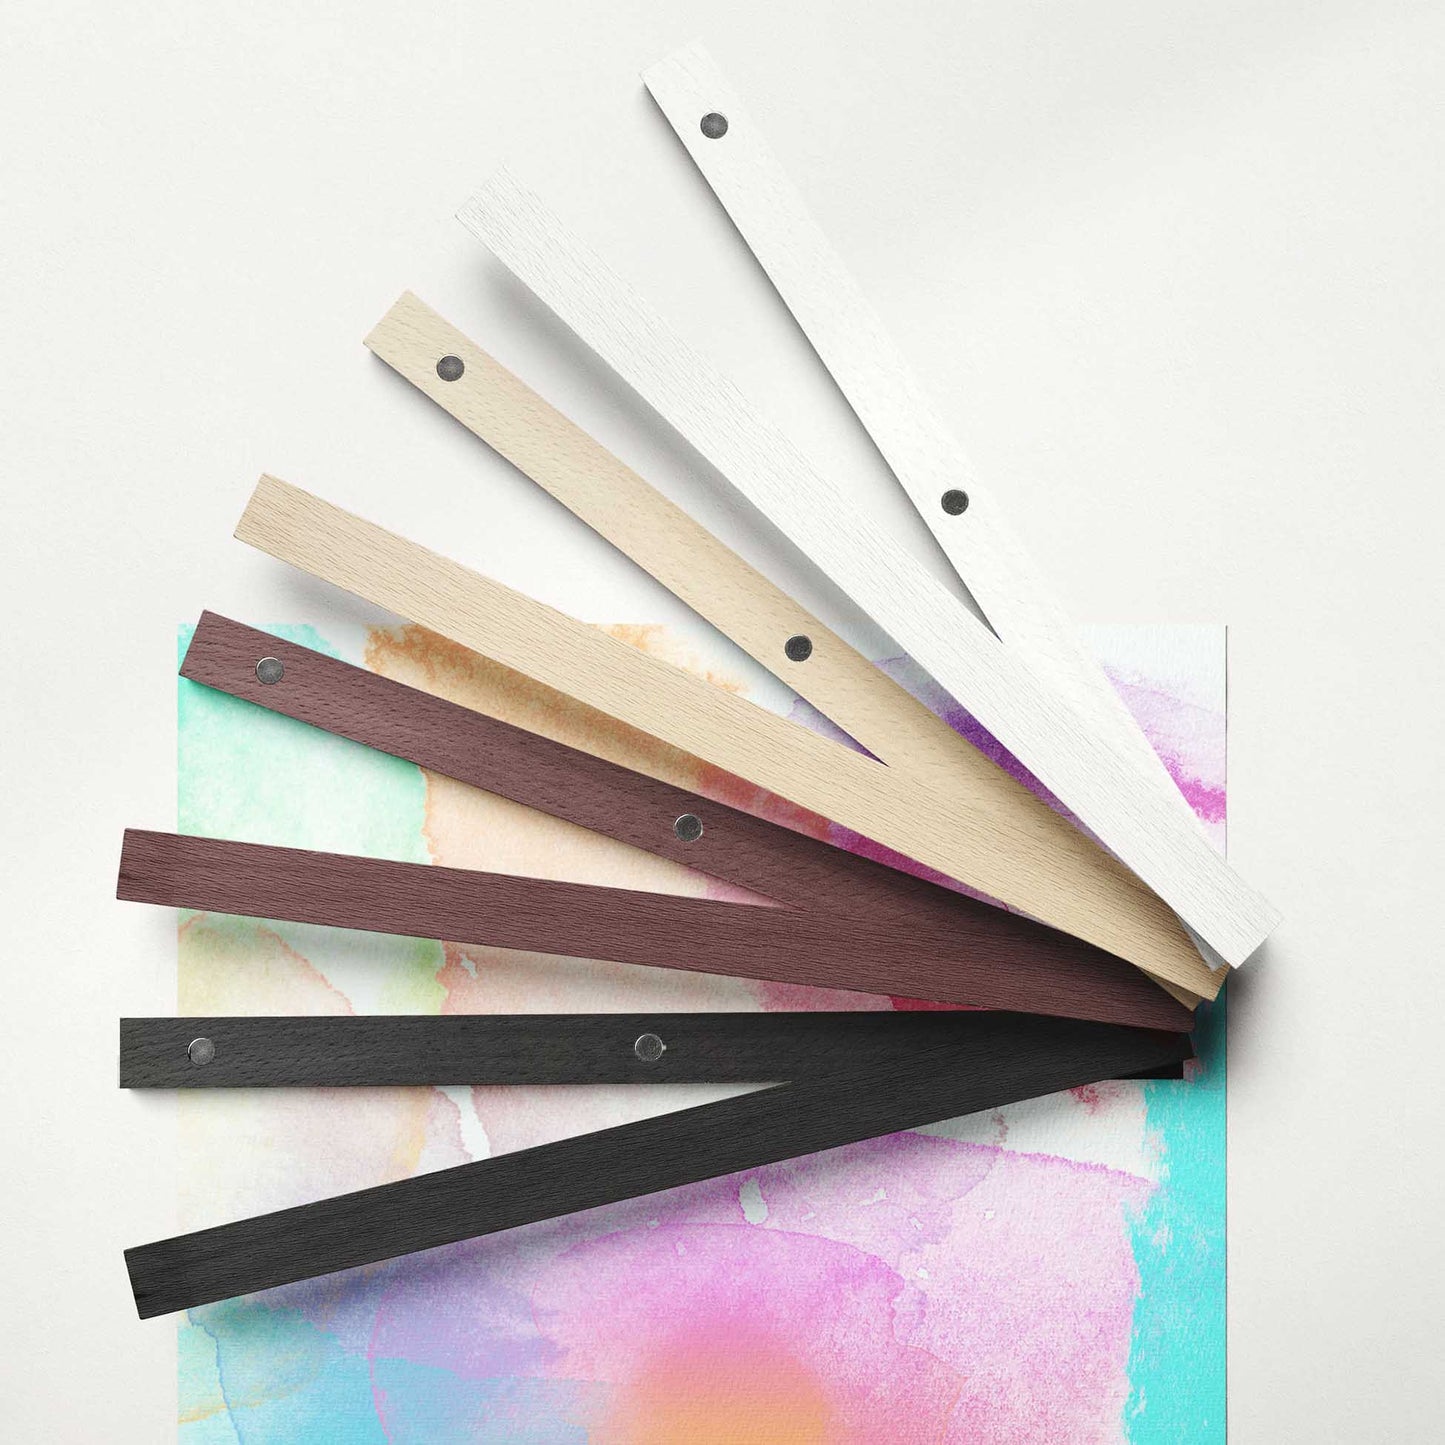 Discover the artistic beauty of the Personalised Artistic Brush Poster Hanger. Painted in a stunning watercolour style, this custom piece transforms your photo into a vibrant and imaginative work of art. The expressive brush strokes 